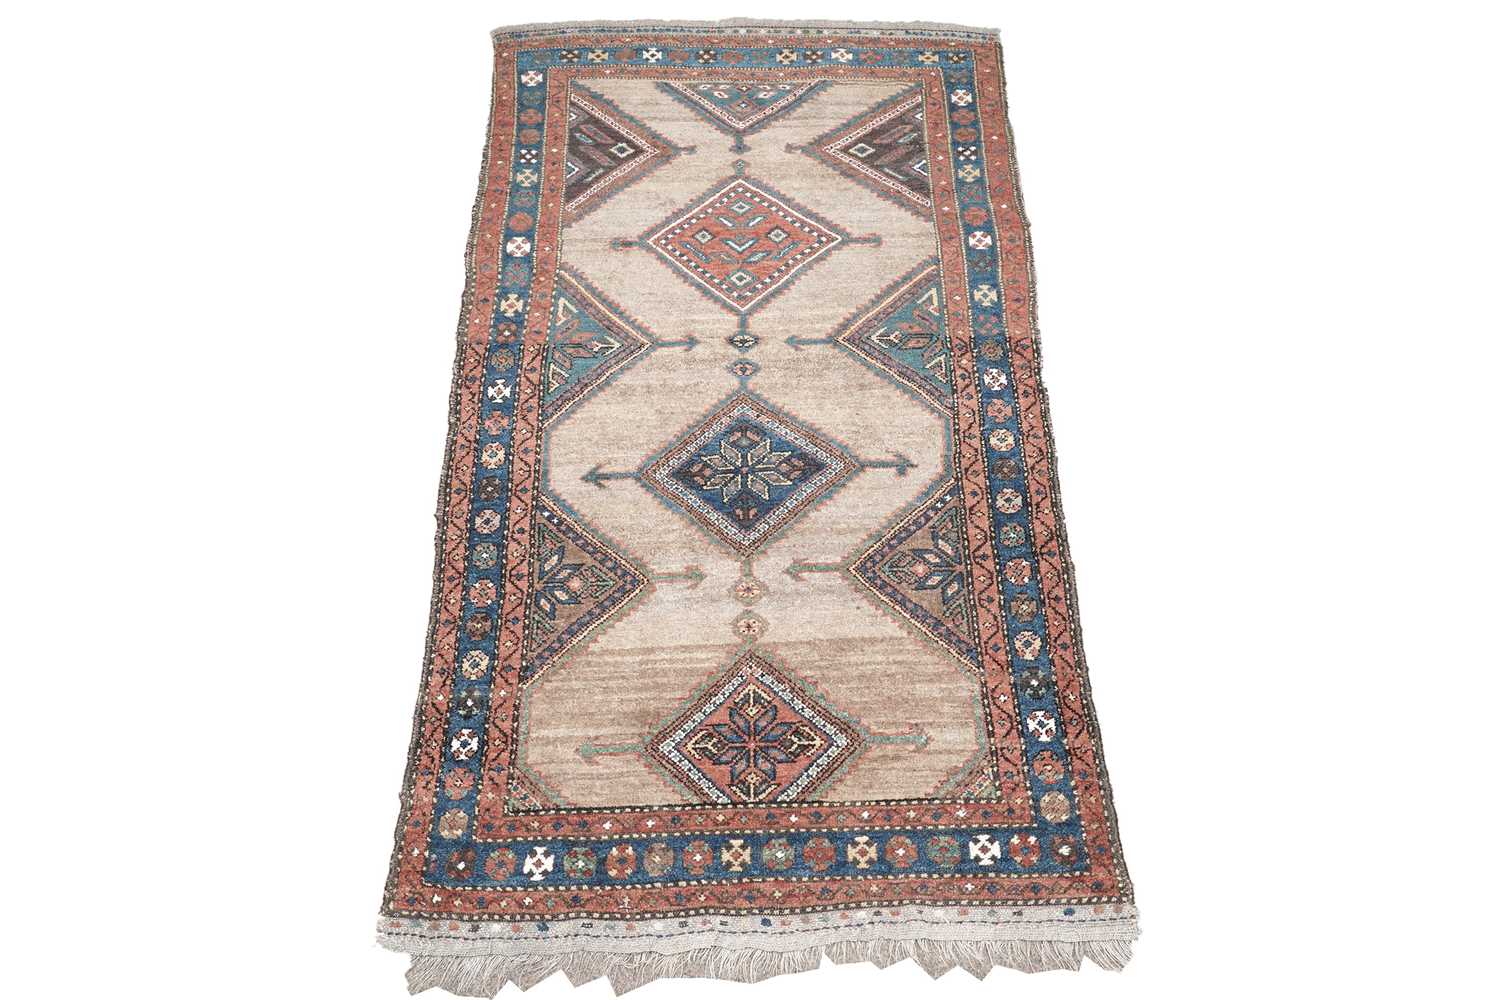 A Caucasian-style rug